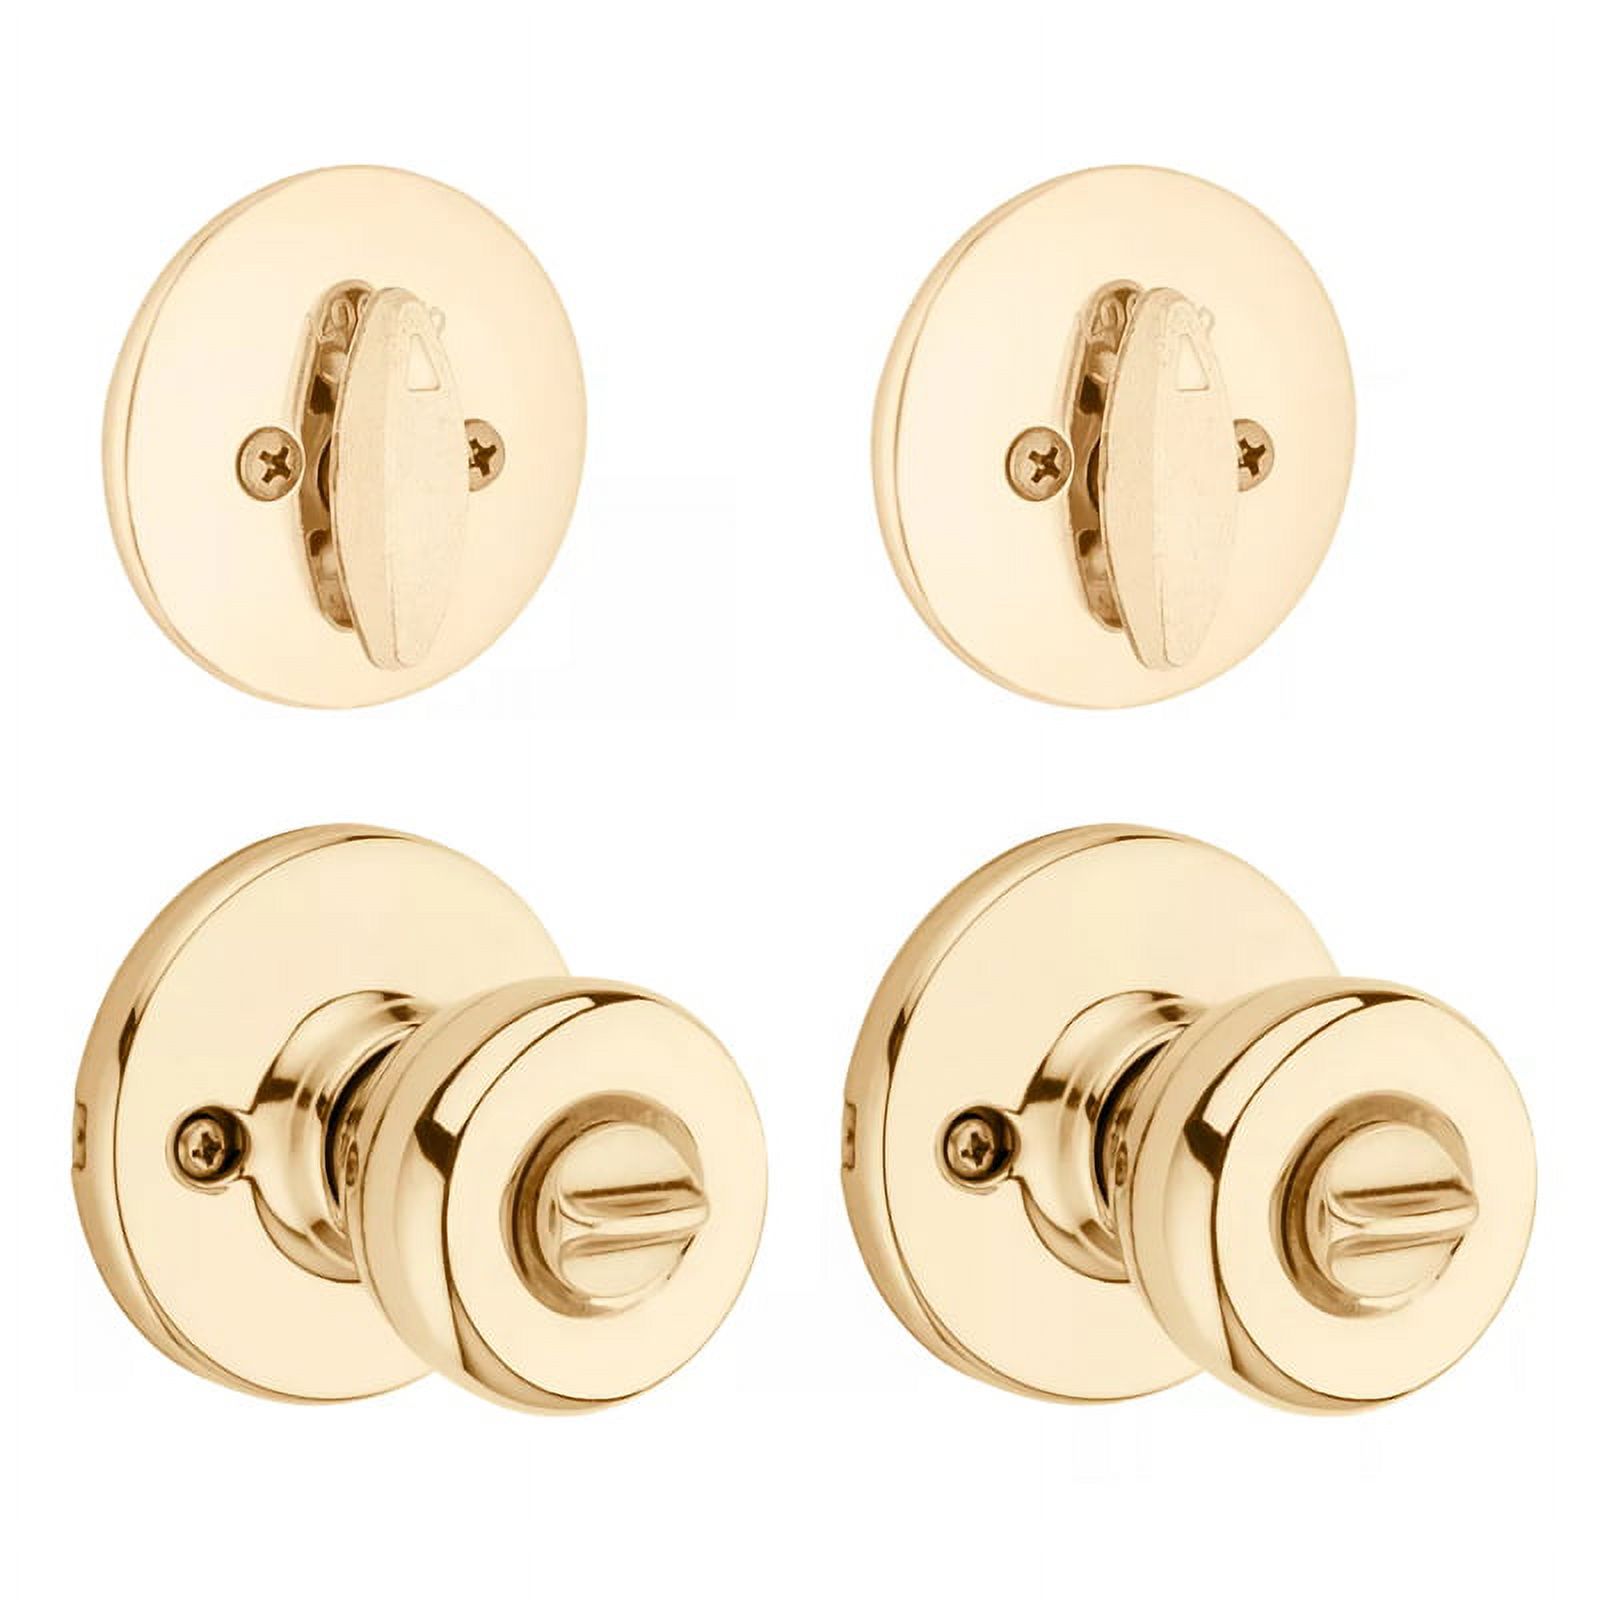 Kwikset 242 Tylo Entry Knob and Single Cylinder Deadbolt Project Pack in Antique Brass by Kwikset - 2